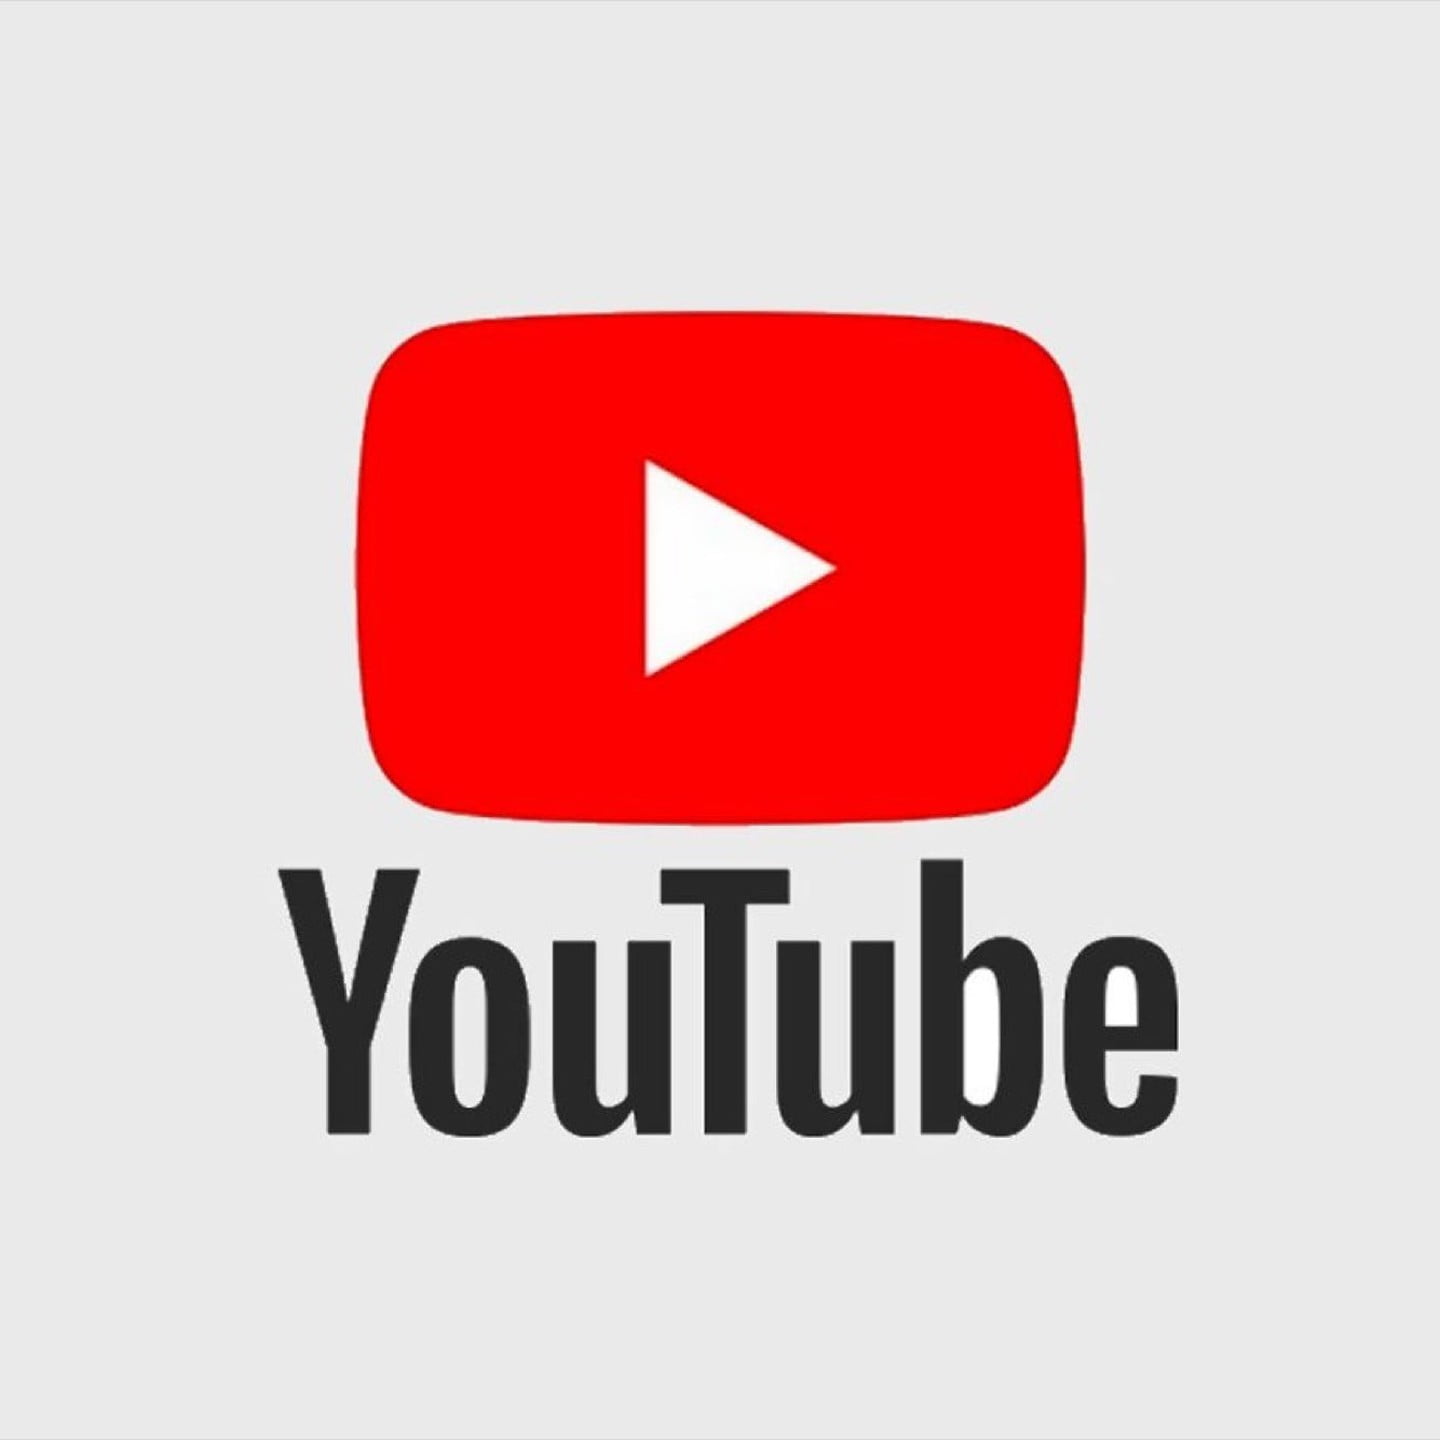 YouTube announces top trending videos and creators of 2021